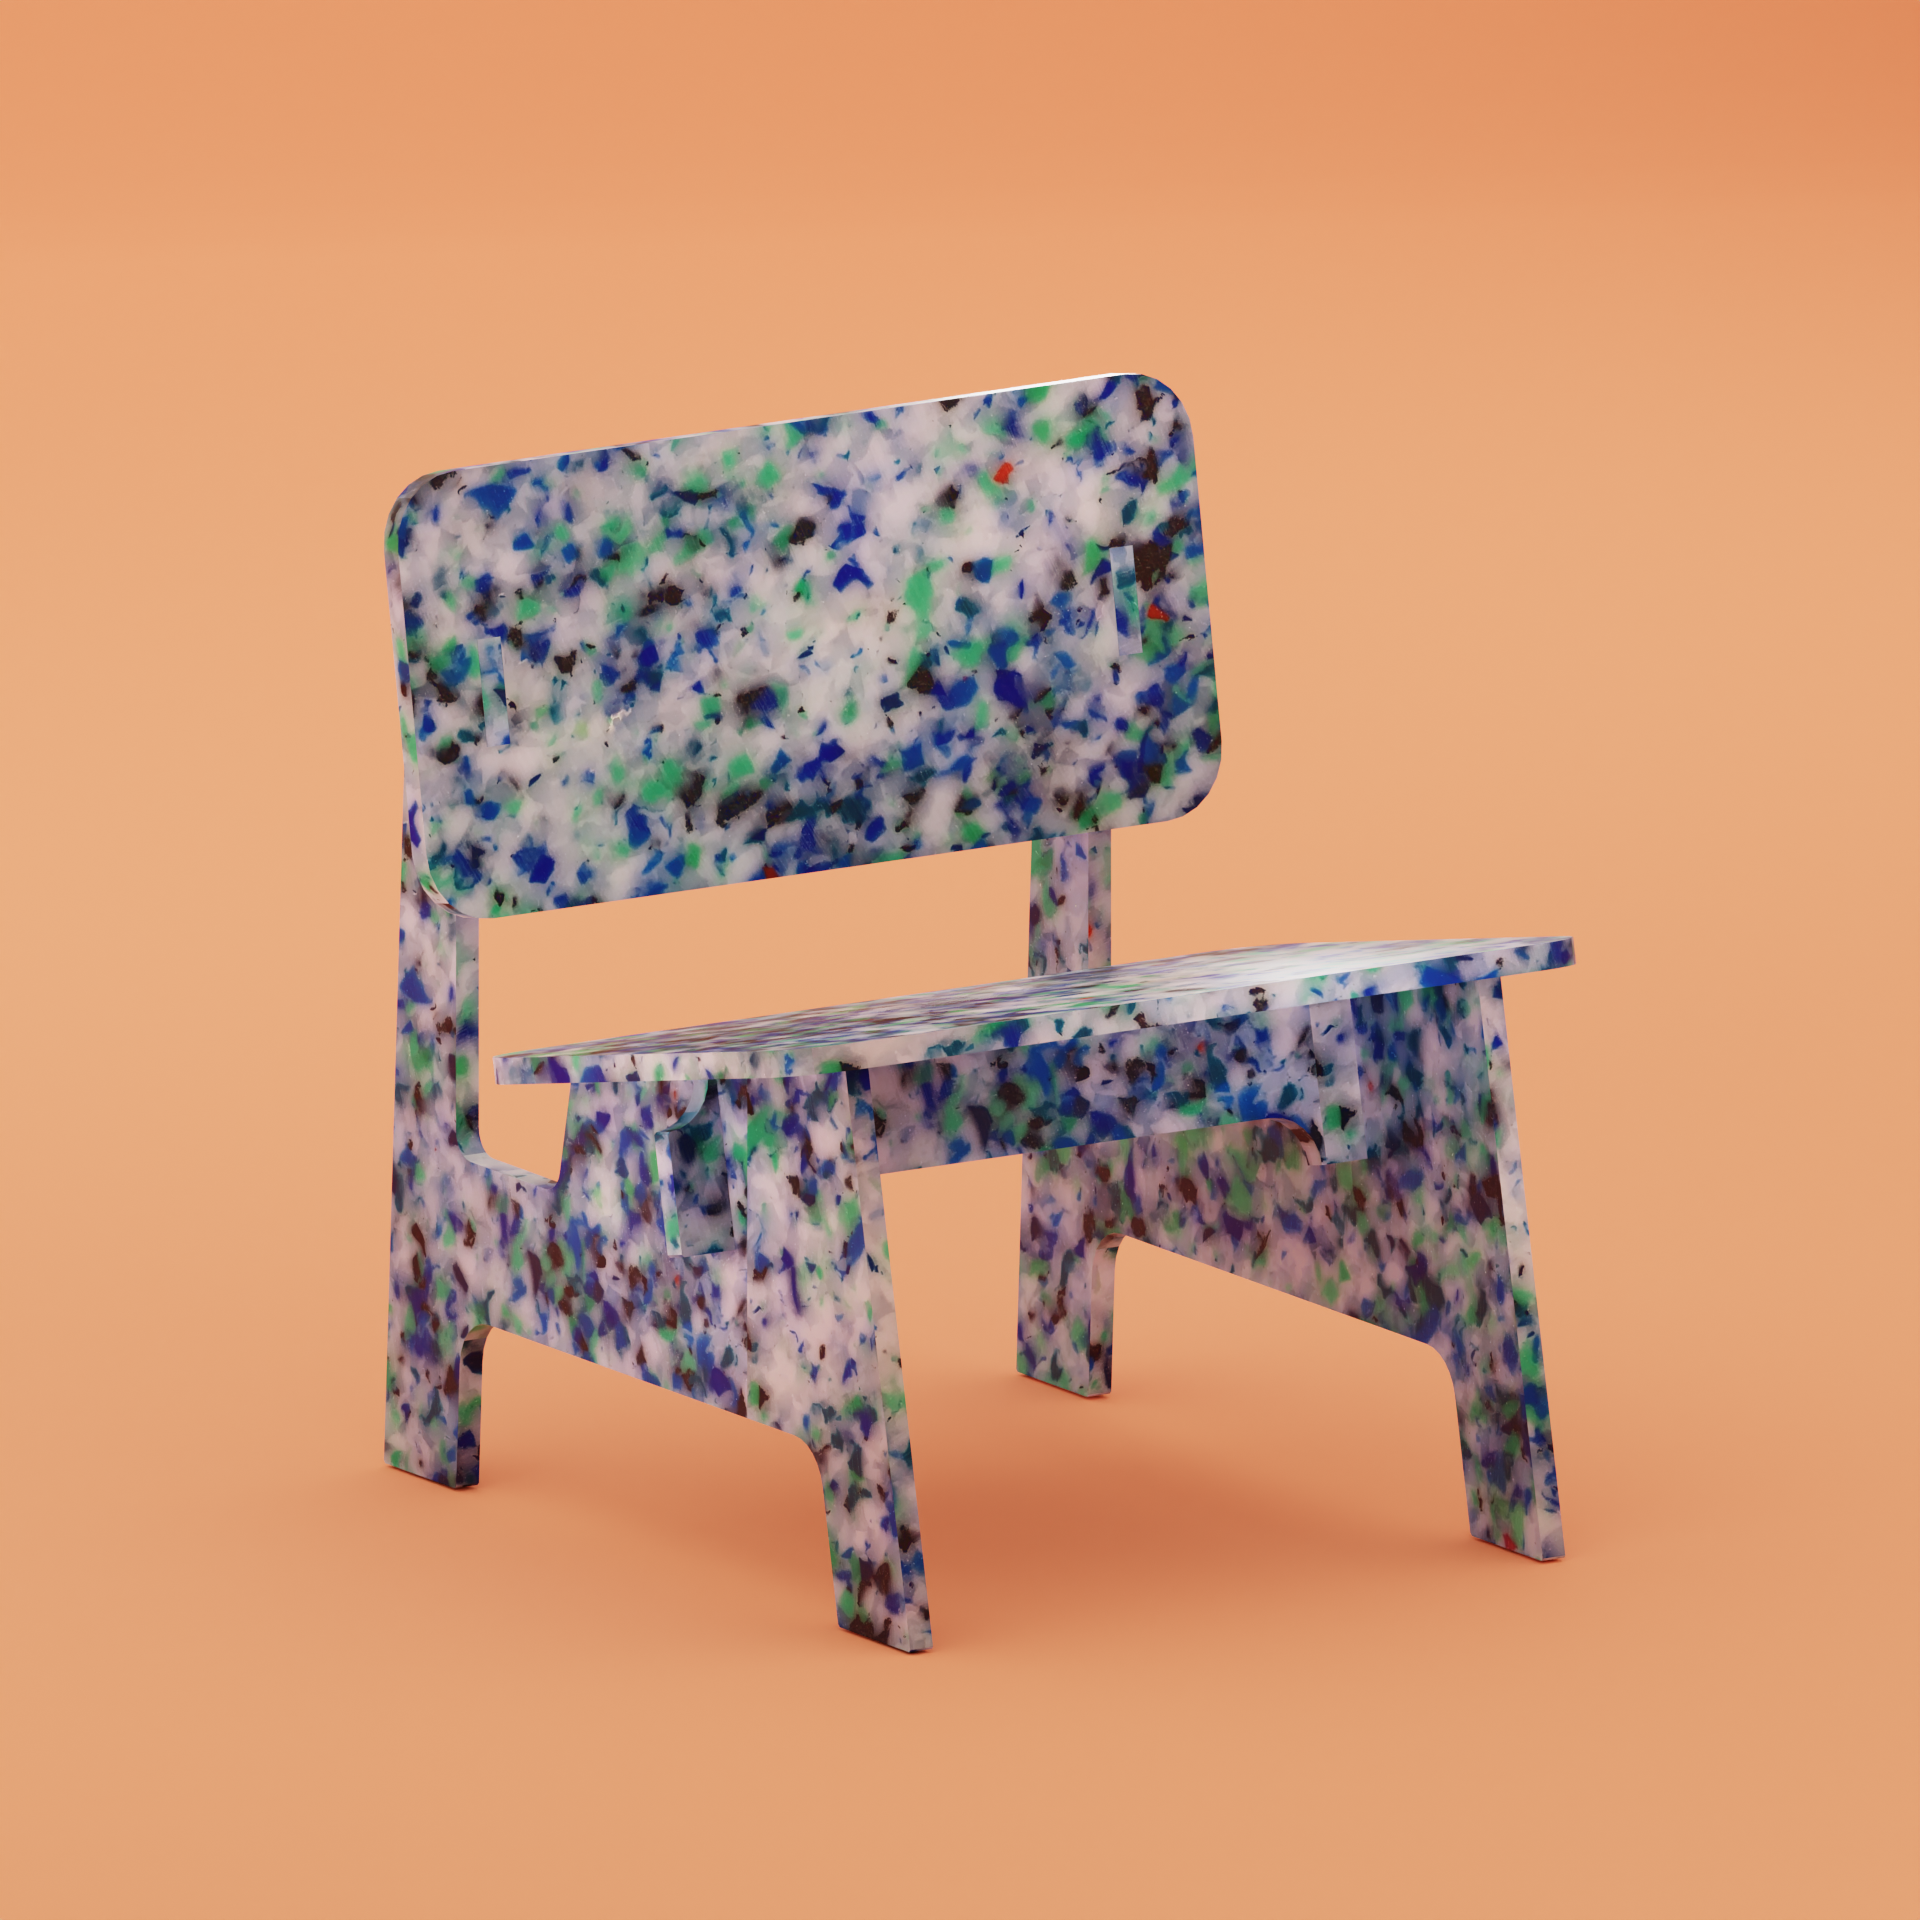 RENDER OF BLUE CHAIR BY THE MINIMONO PROJECT - BRAND FOR ECO FRIENDLY - PLAYFUL - MULTI FUNCTIONAL - SUSTAINABLE - HIGH QUALITY - DESIGN FURNITURE FROM RECYCLED PLASTIC FOR BOTH ADULT AND CHILDREN MADE IN BERLIN GERMANY